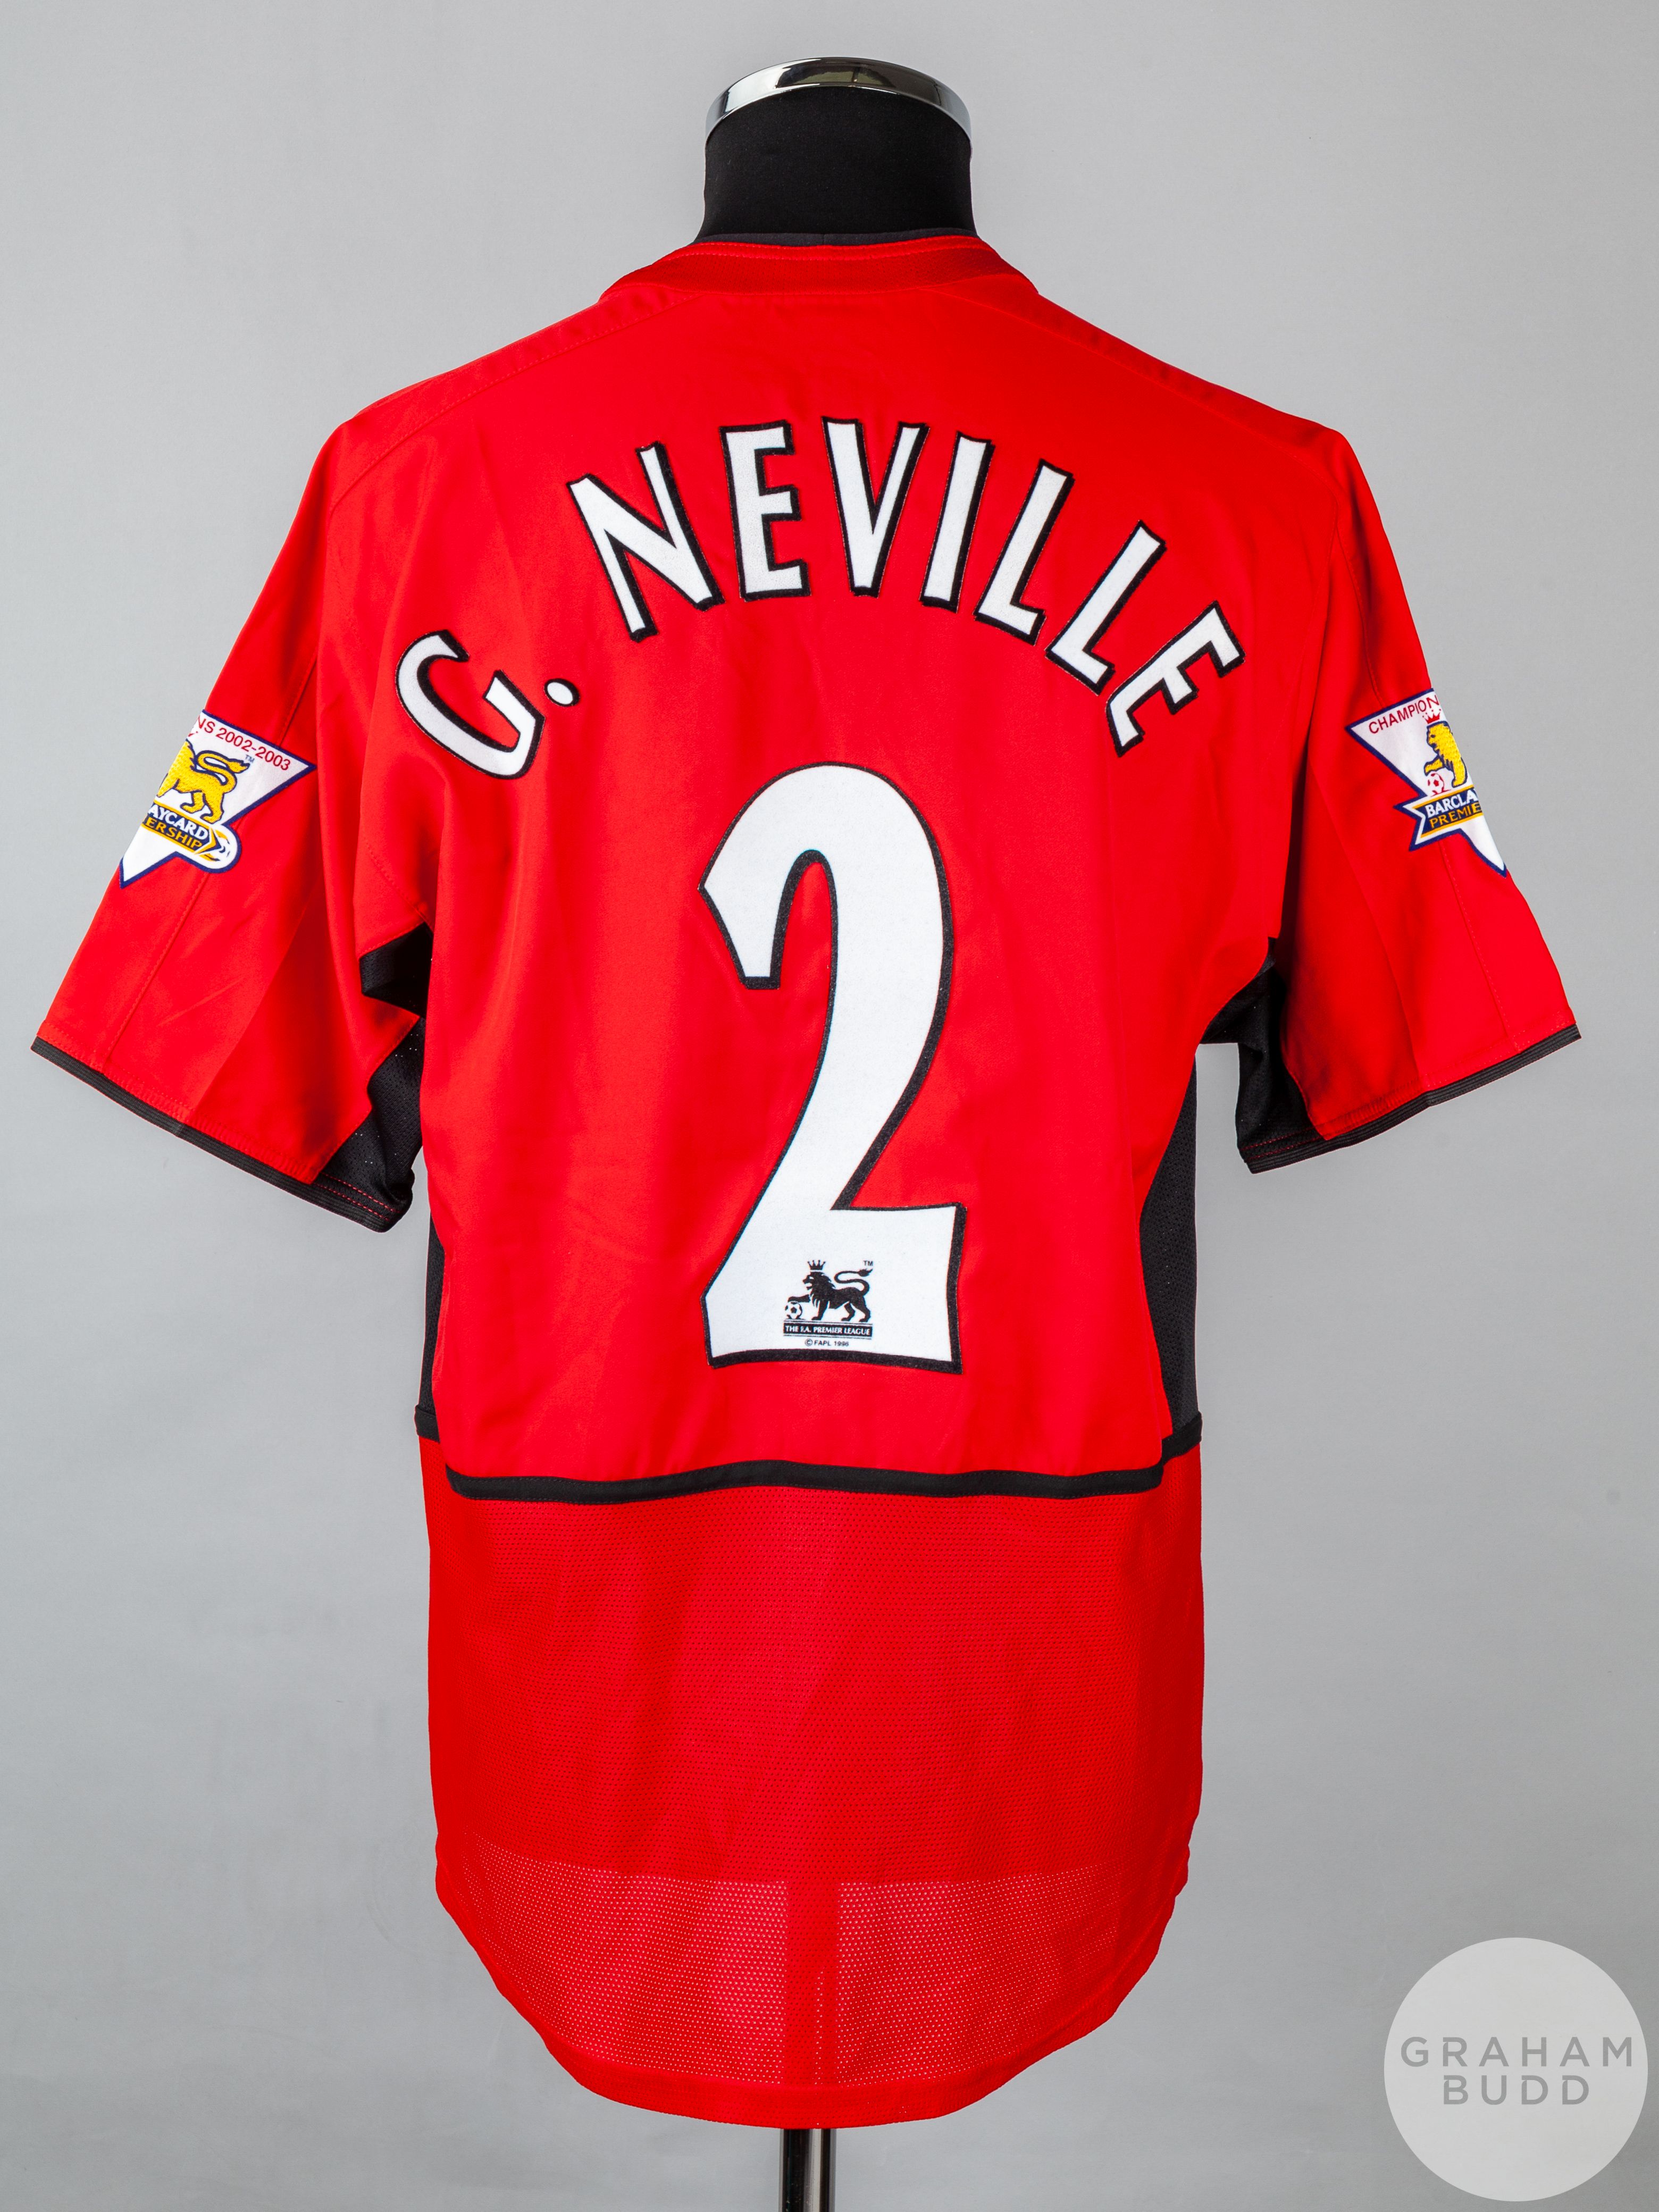 Gary Neville red and black No.2 Manchester United short-sleeve shirt - Image 2 of 5